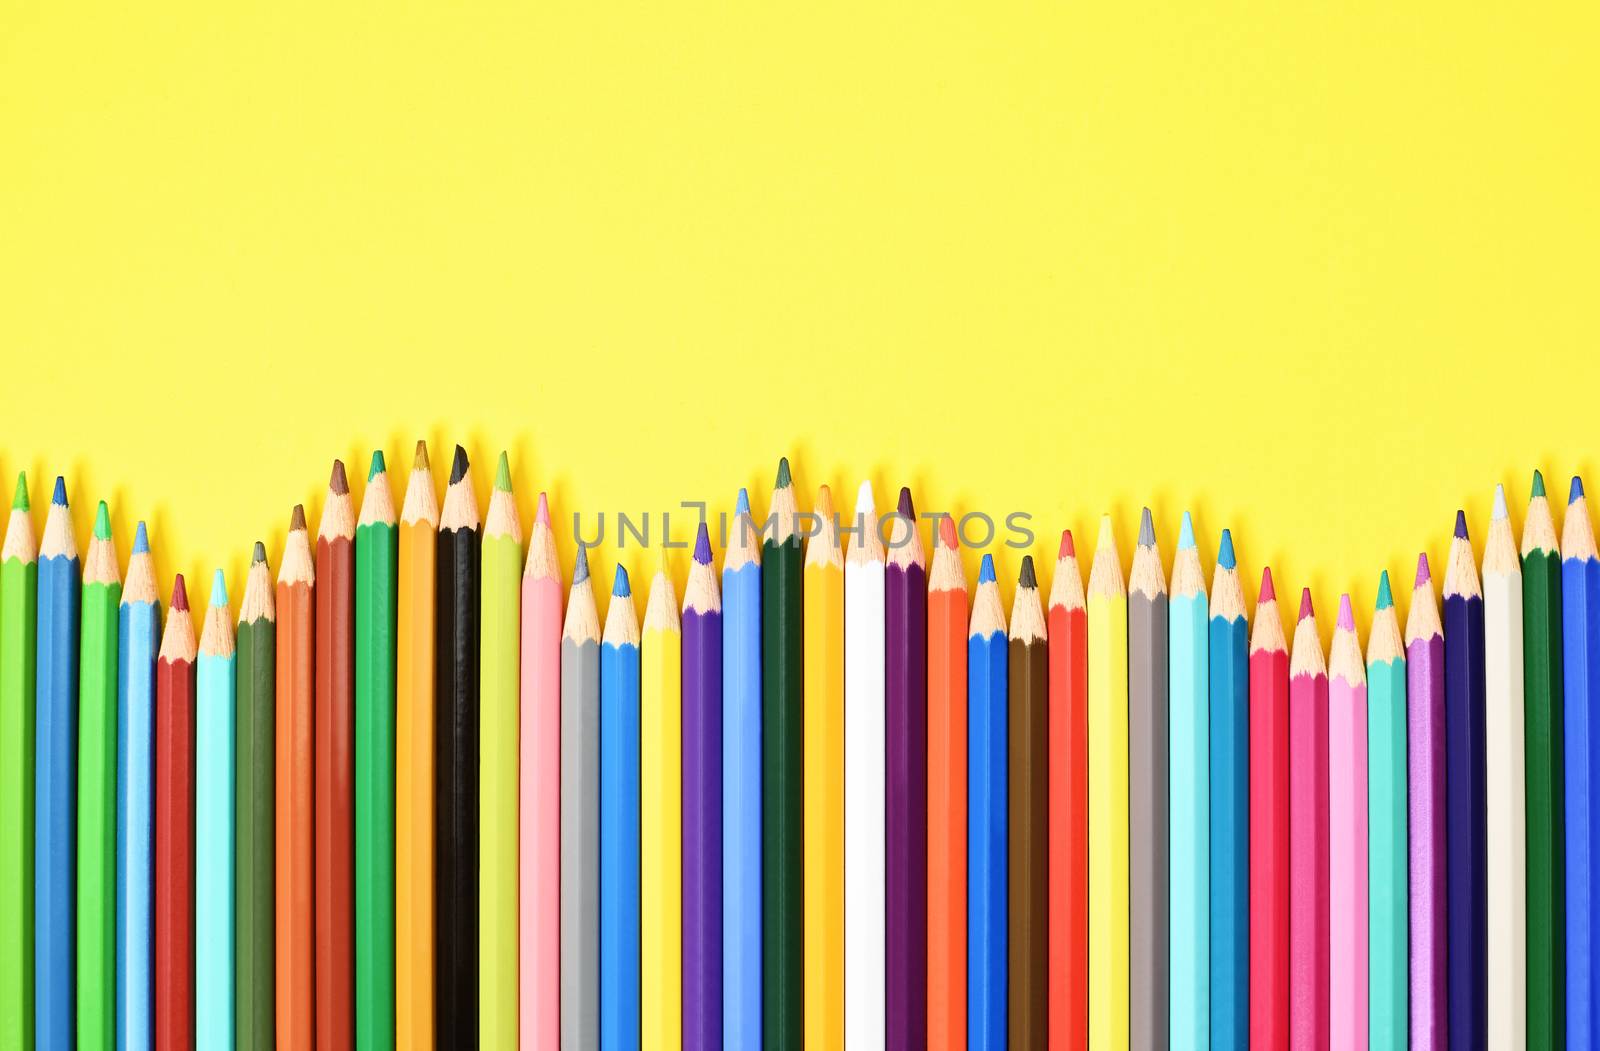 Wave of coloring pencils on yellow background by Mendelex